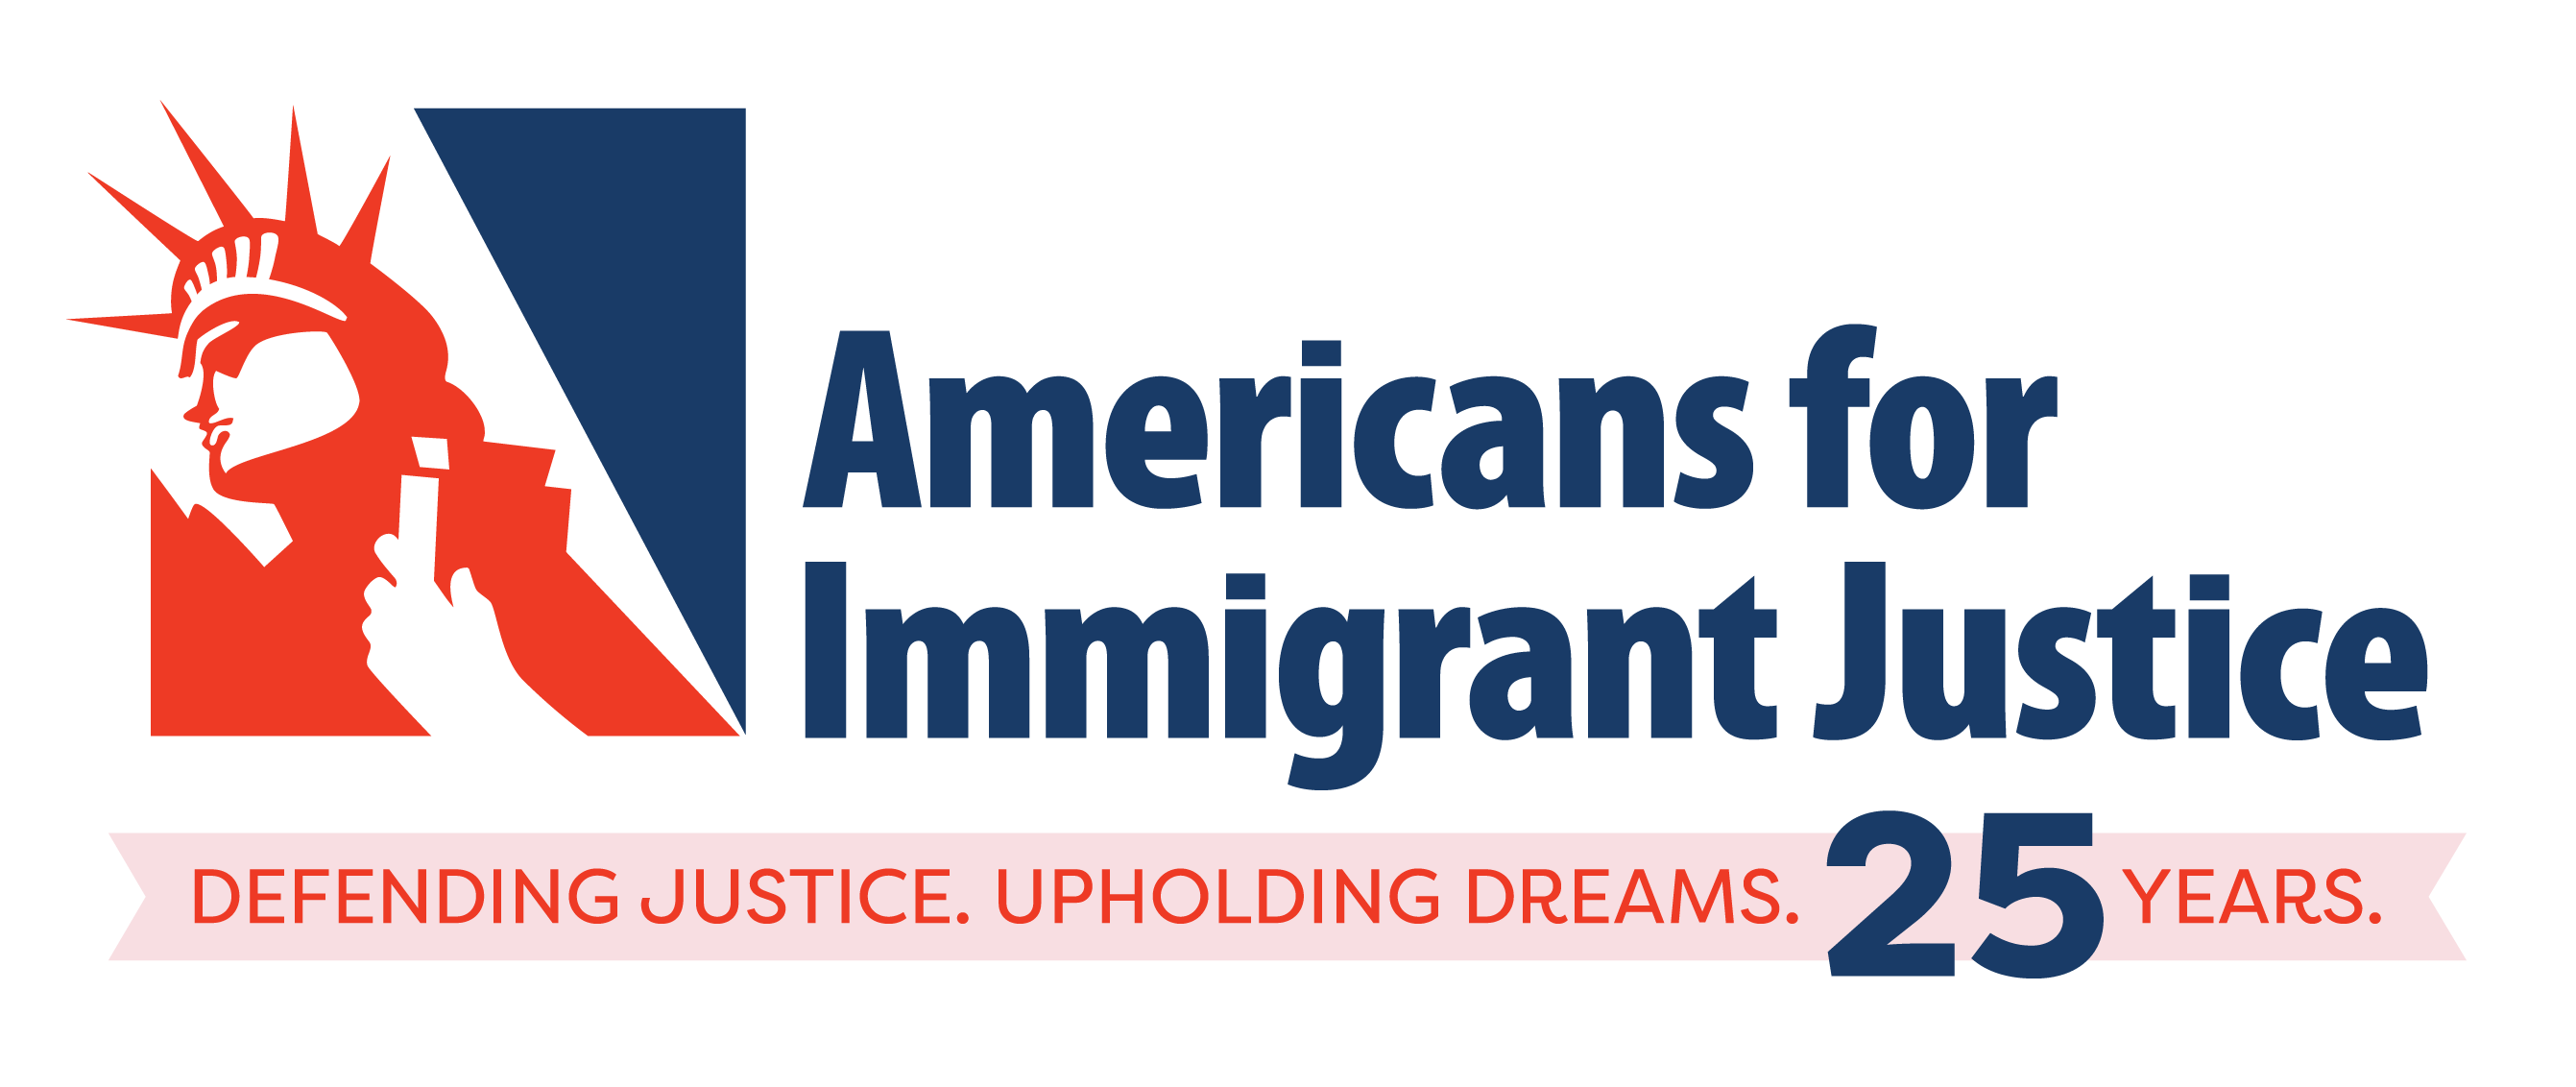 Americans for Immigrant Justice | Defending Justice. Upholding Dreams. 25 Years.